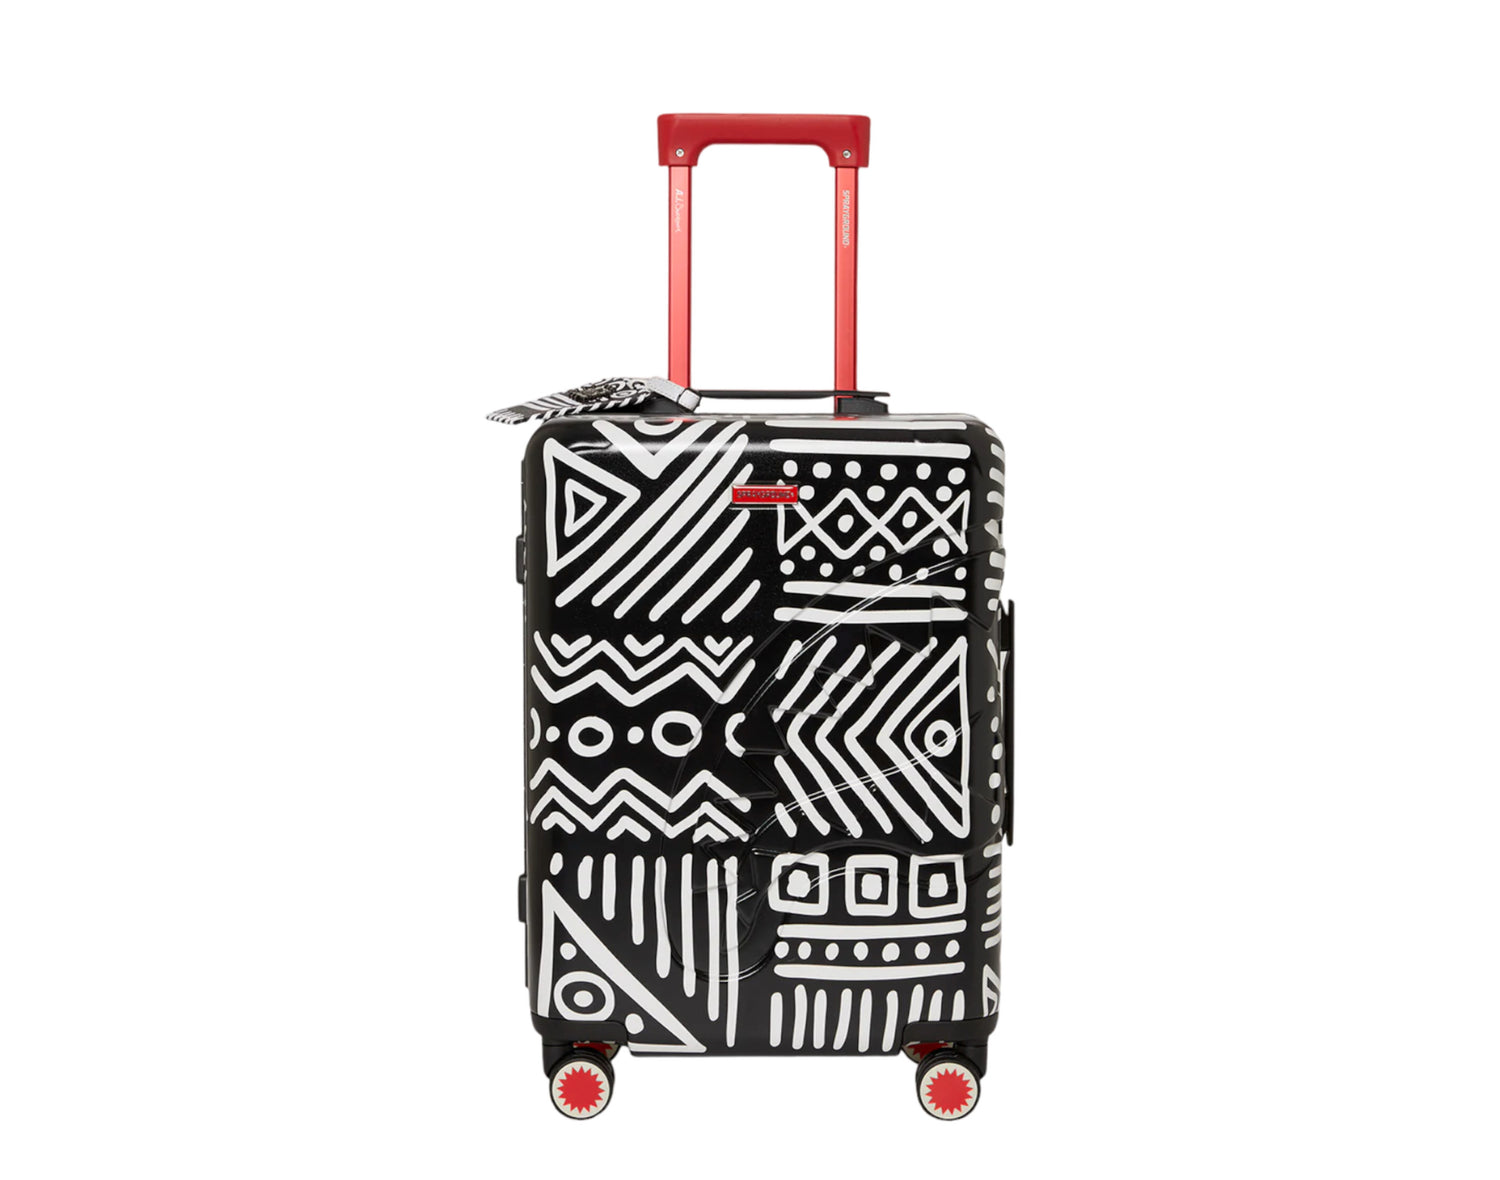 Luggage - Newest Arrivals